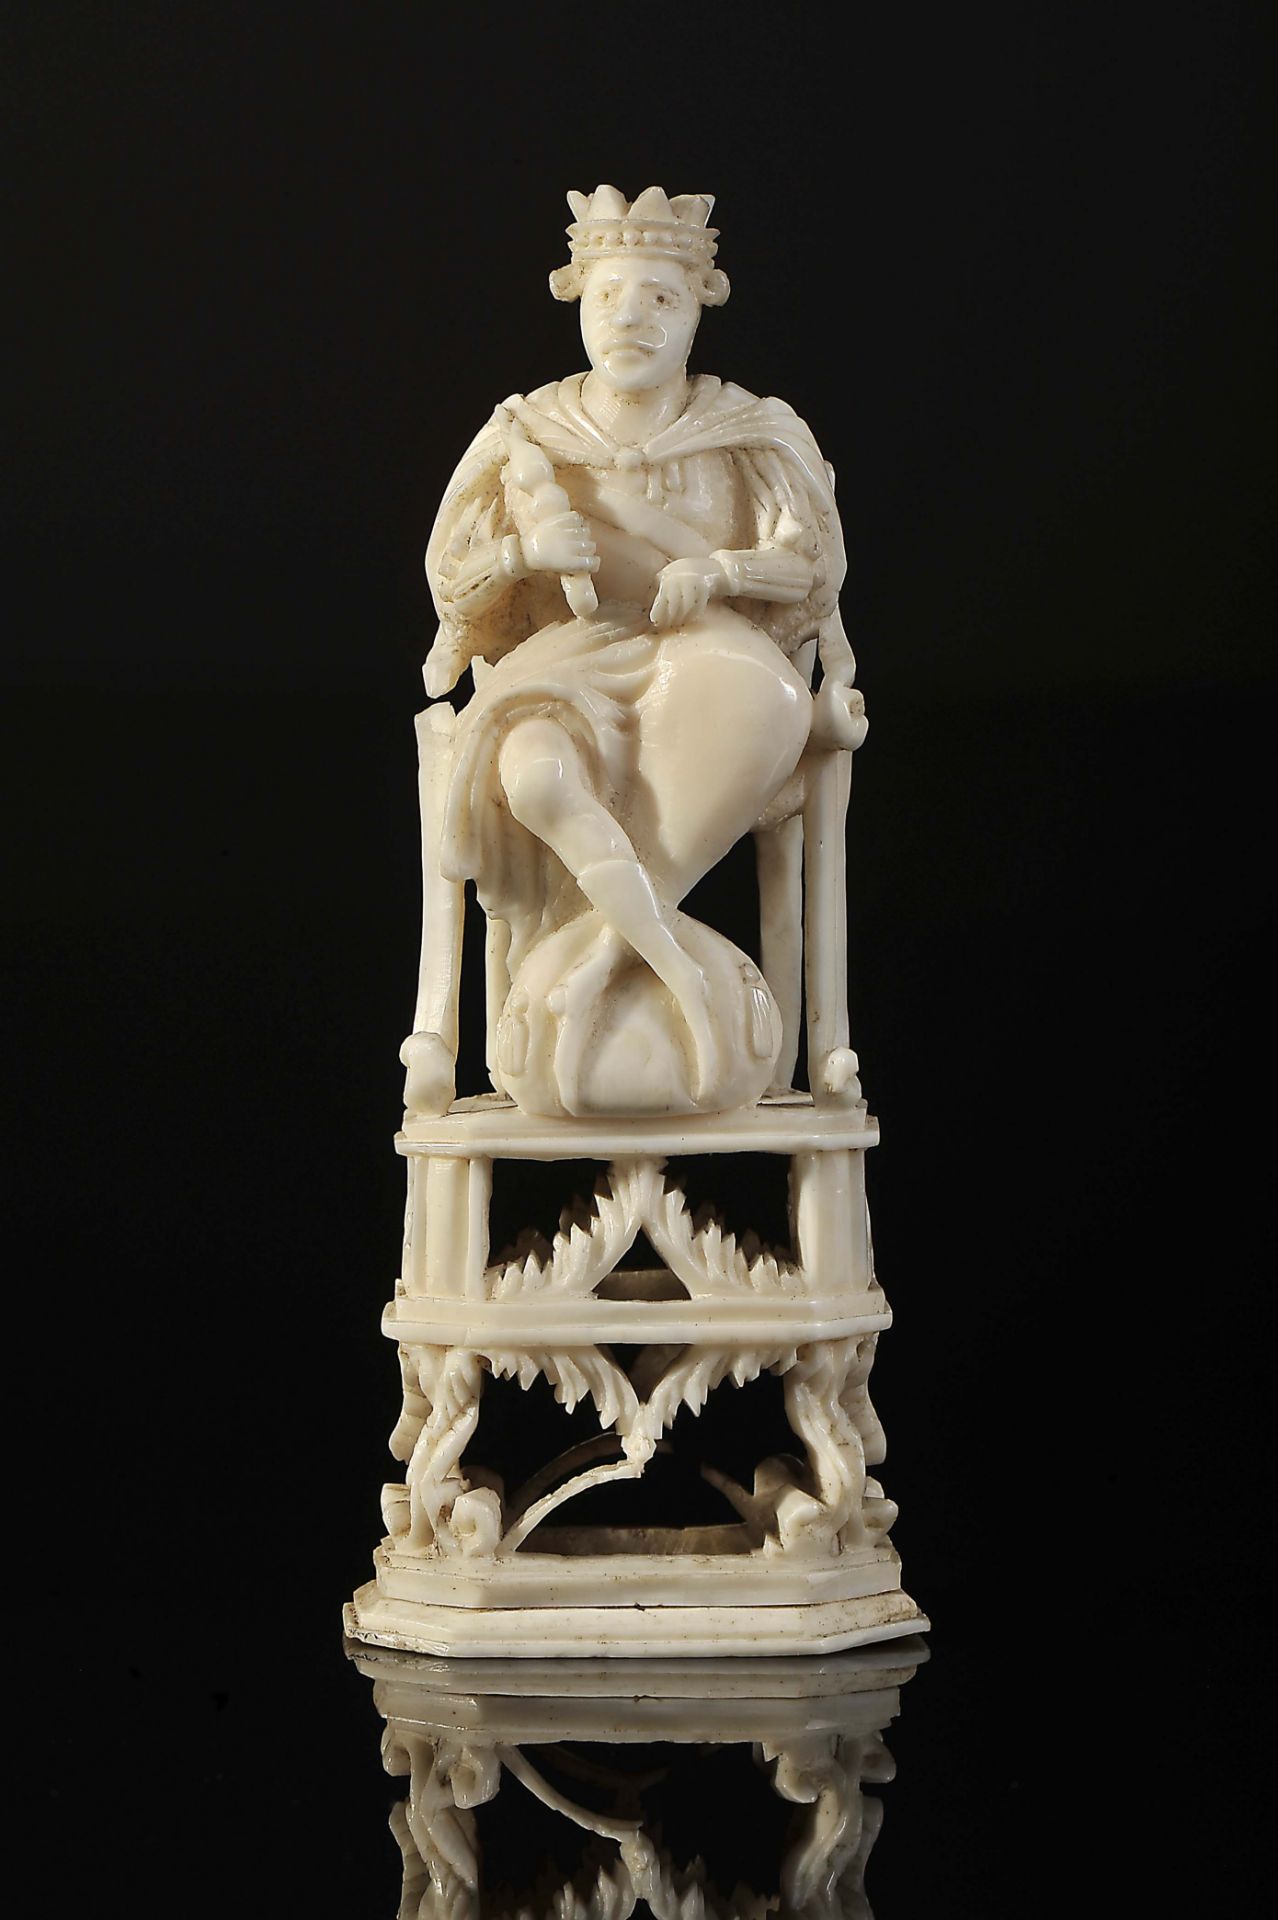 Chess piece, "King Kholmogory on his throne"